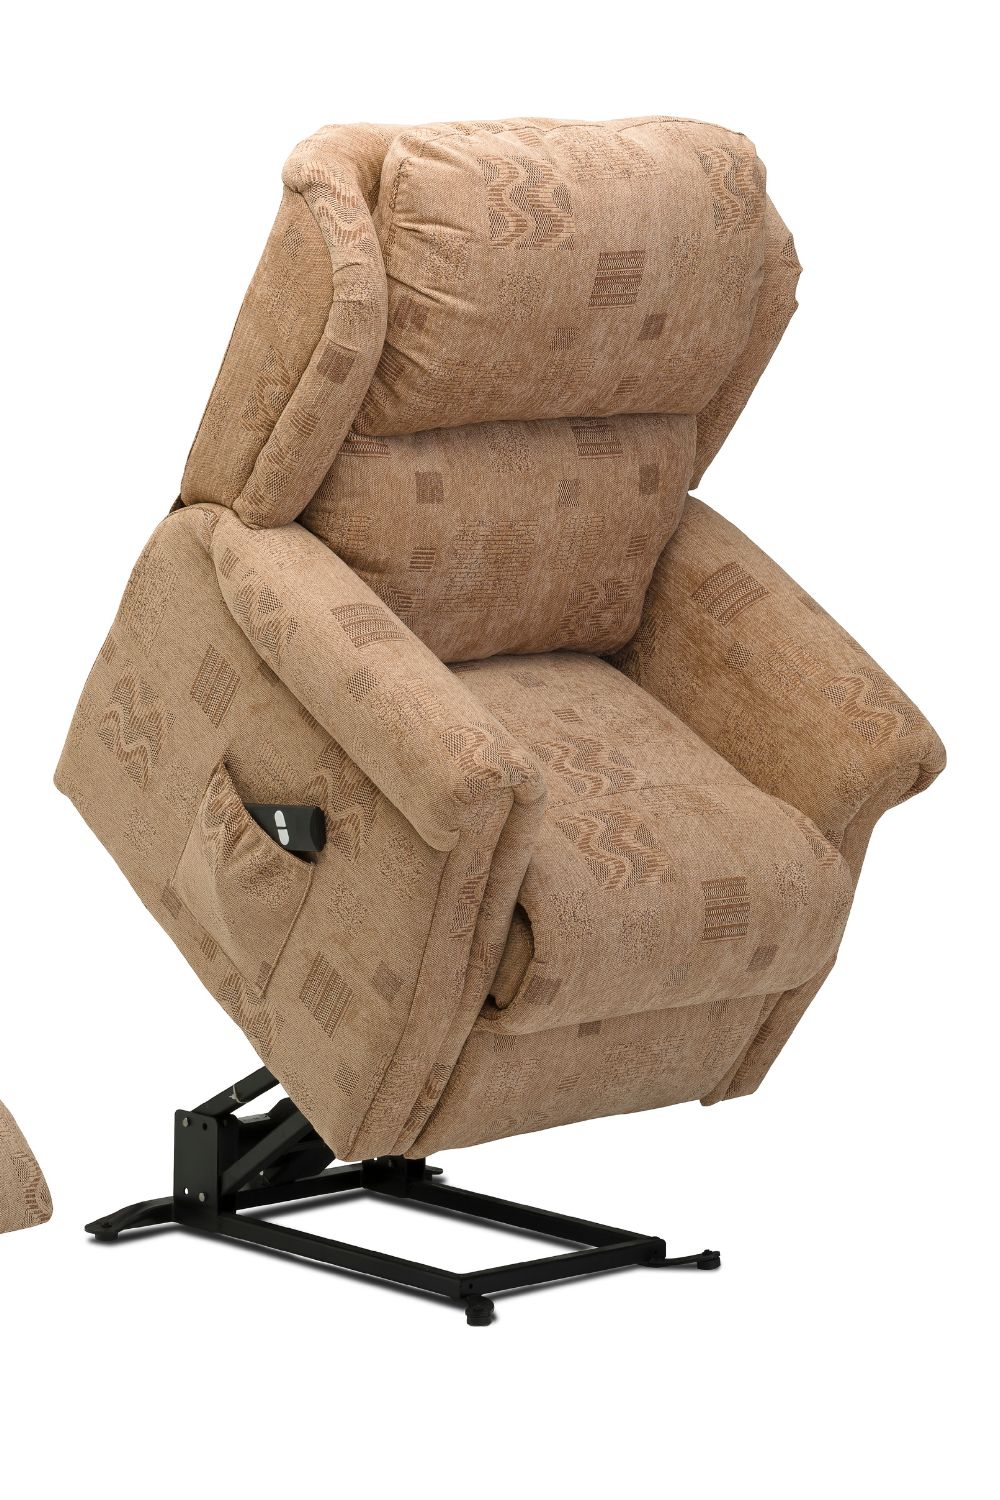 Best Recliner for Seniors Featured Image